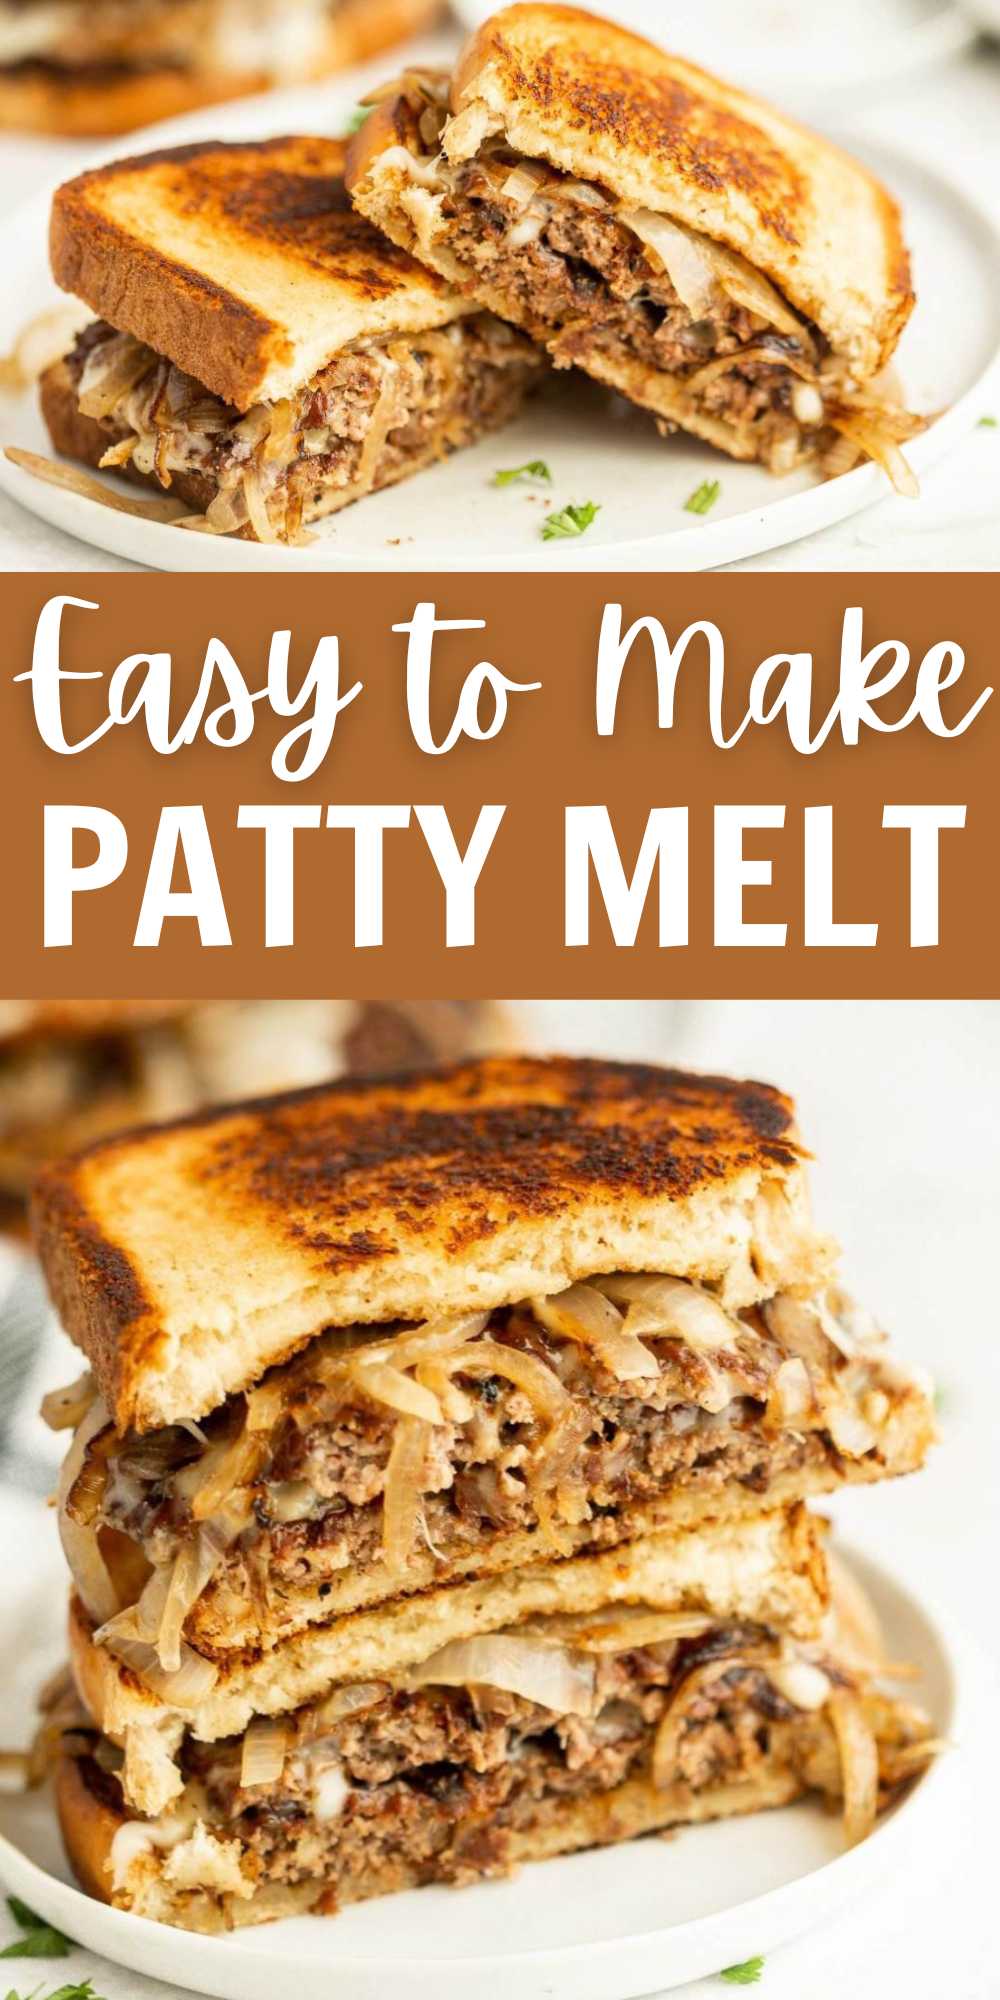 Enjoy the best Patty Melt in minutes with this recipe. The caramelized onions, gooey cheese and hamburger patties combine for a great meal. Our family loves a classic Patty Melt and it is actually very simple to make at home. With just a few simple ingredients, this recipe goes from skillet to table in literally minutes. #eatingonadime #pattymelt #easypattymelt